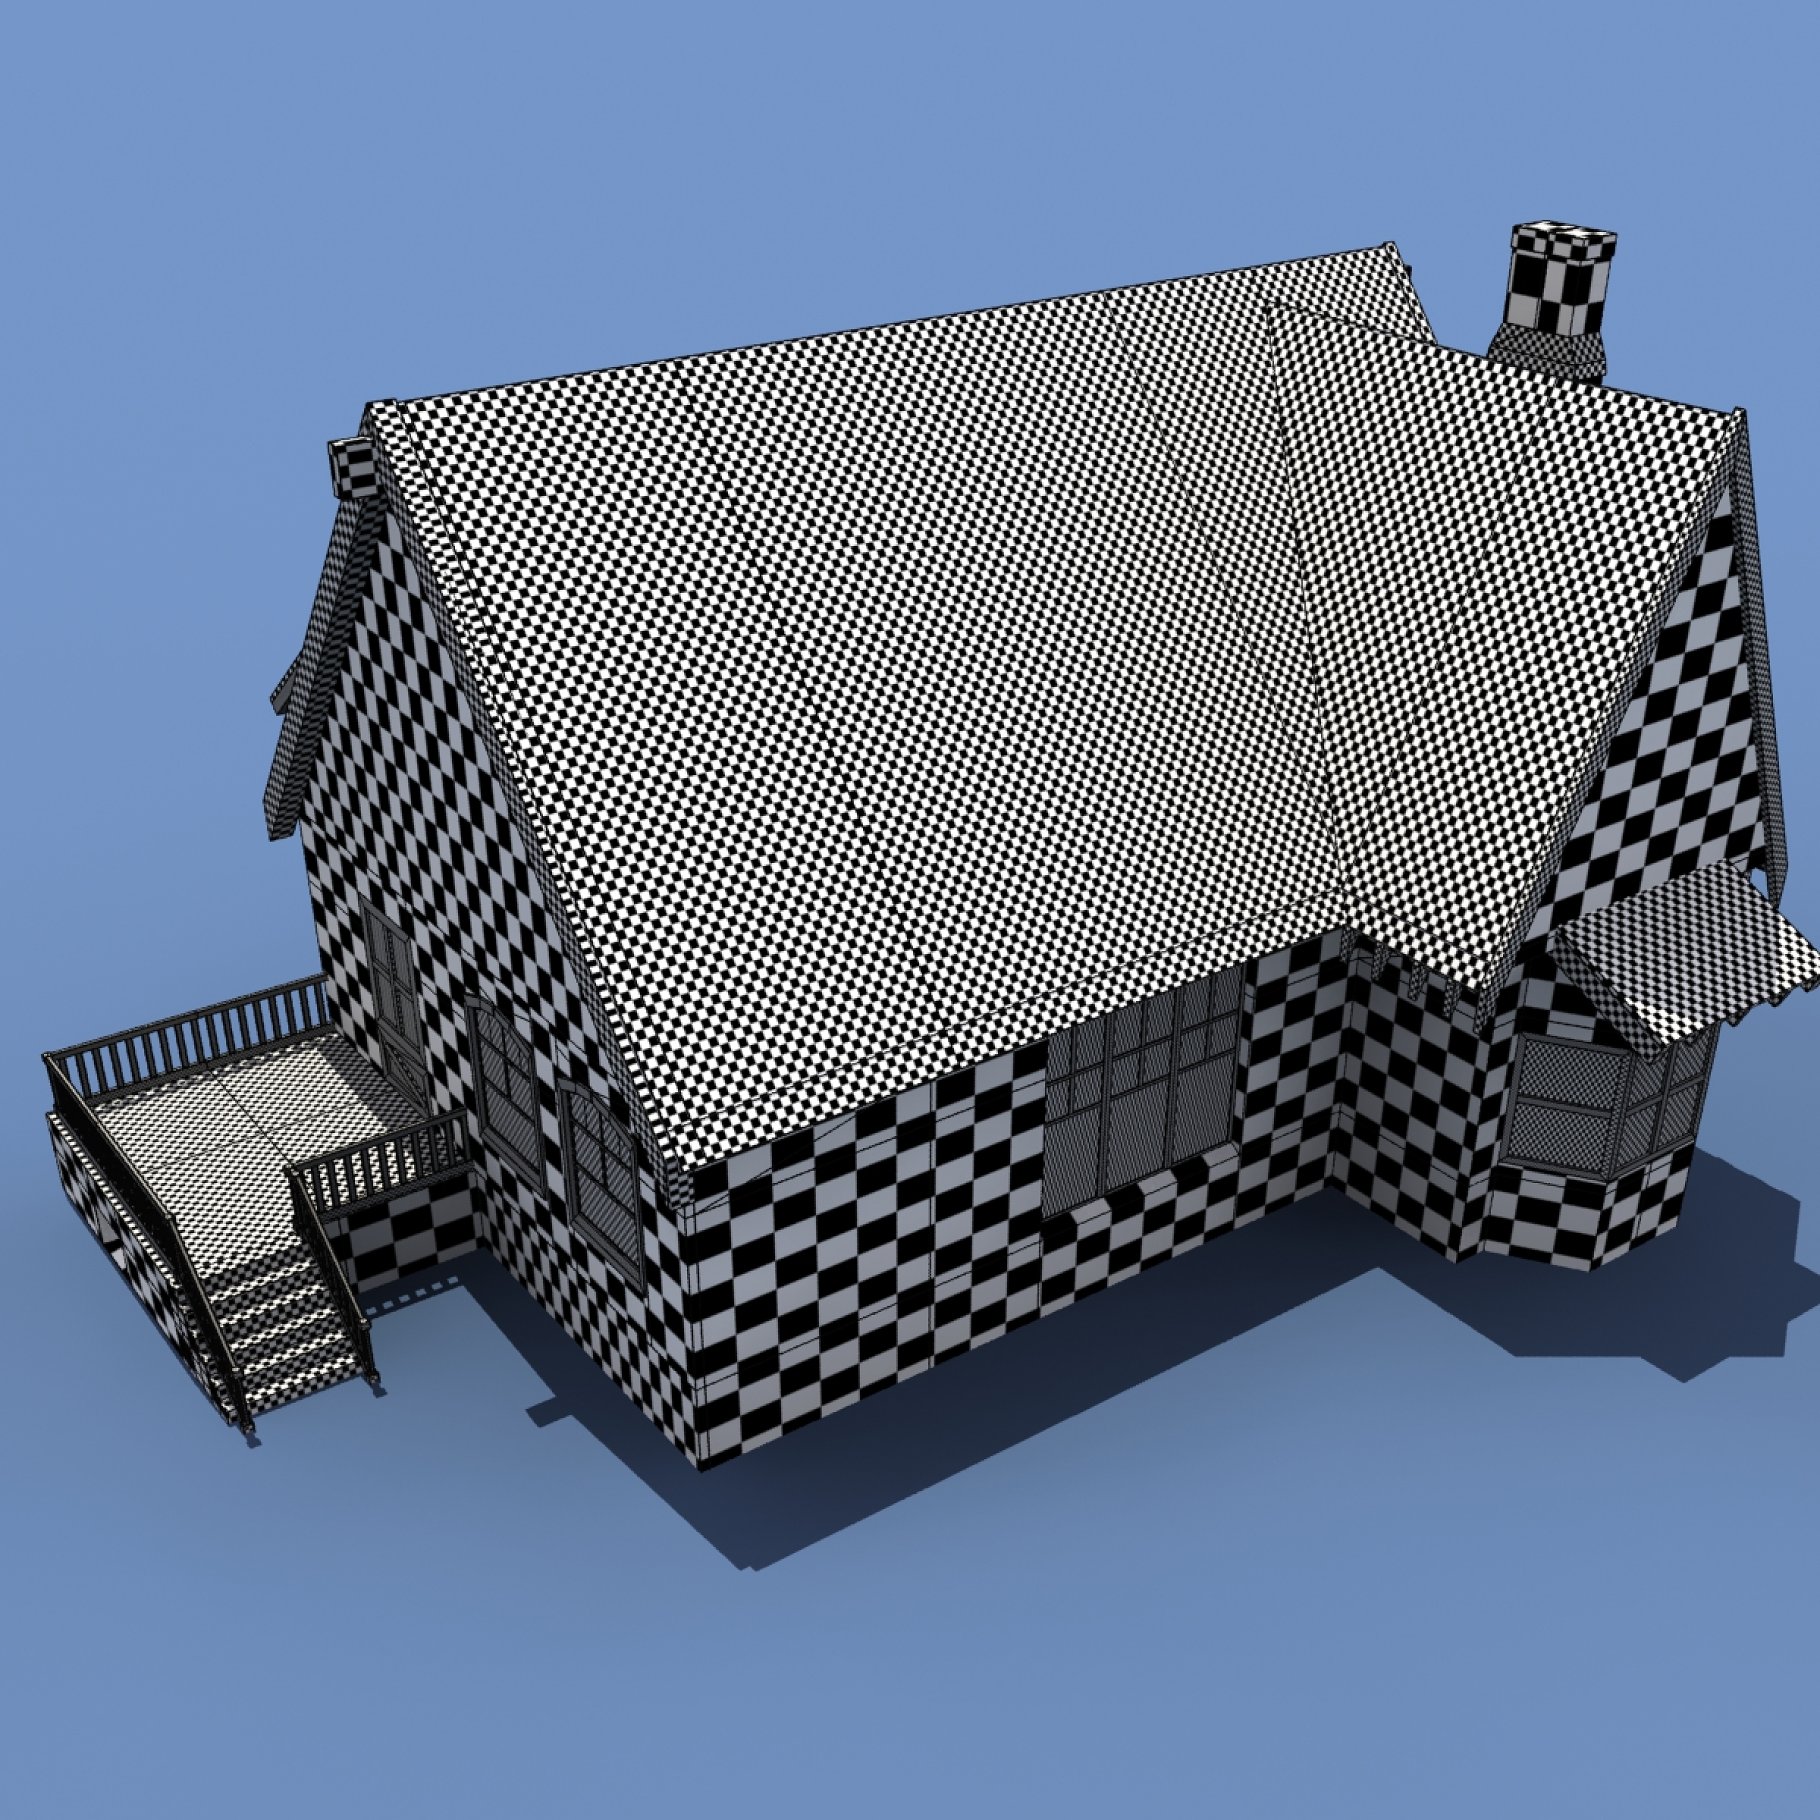 Checkered mockup of low poly house on a blue background.